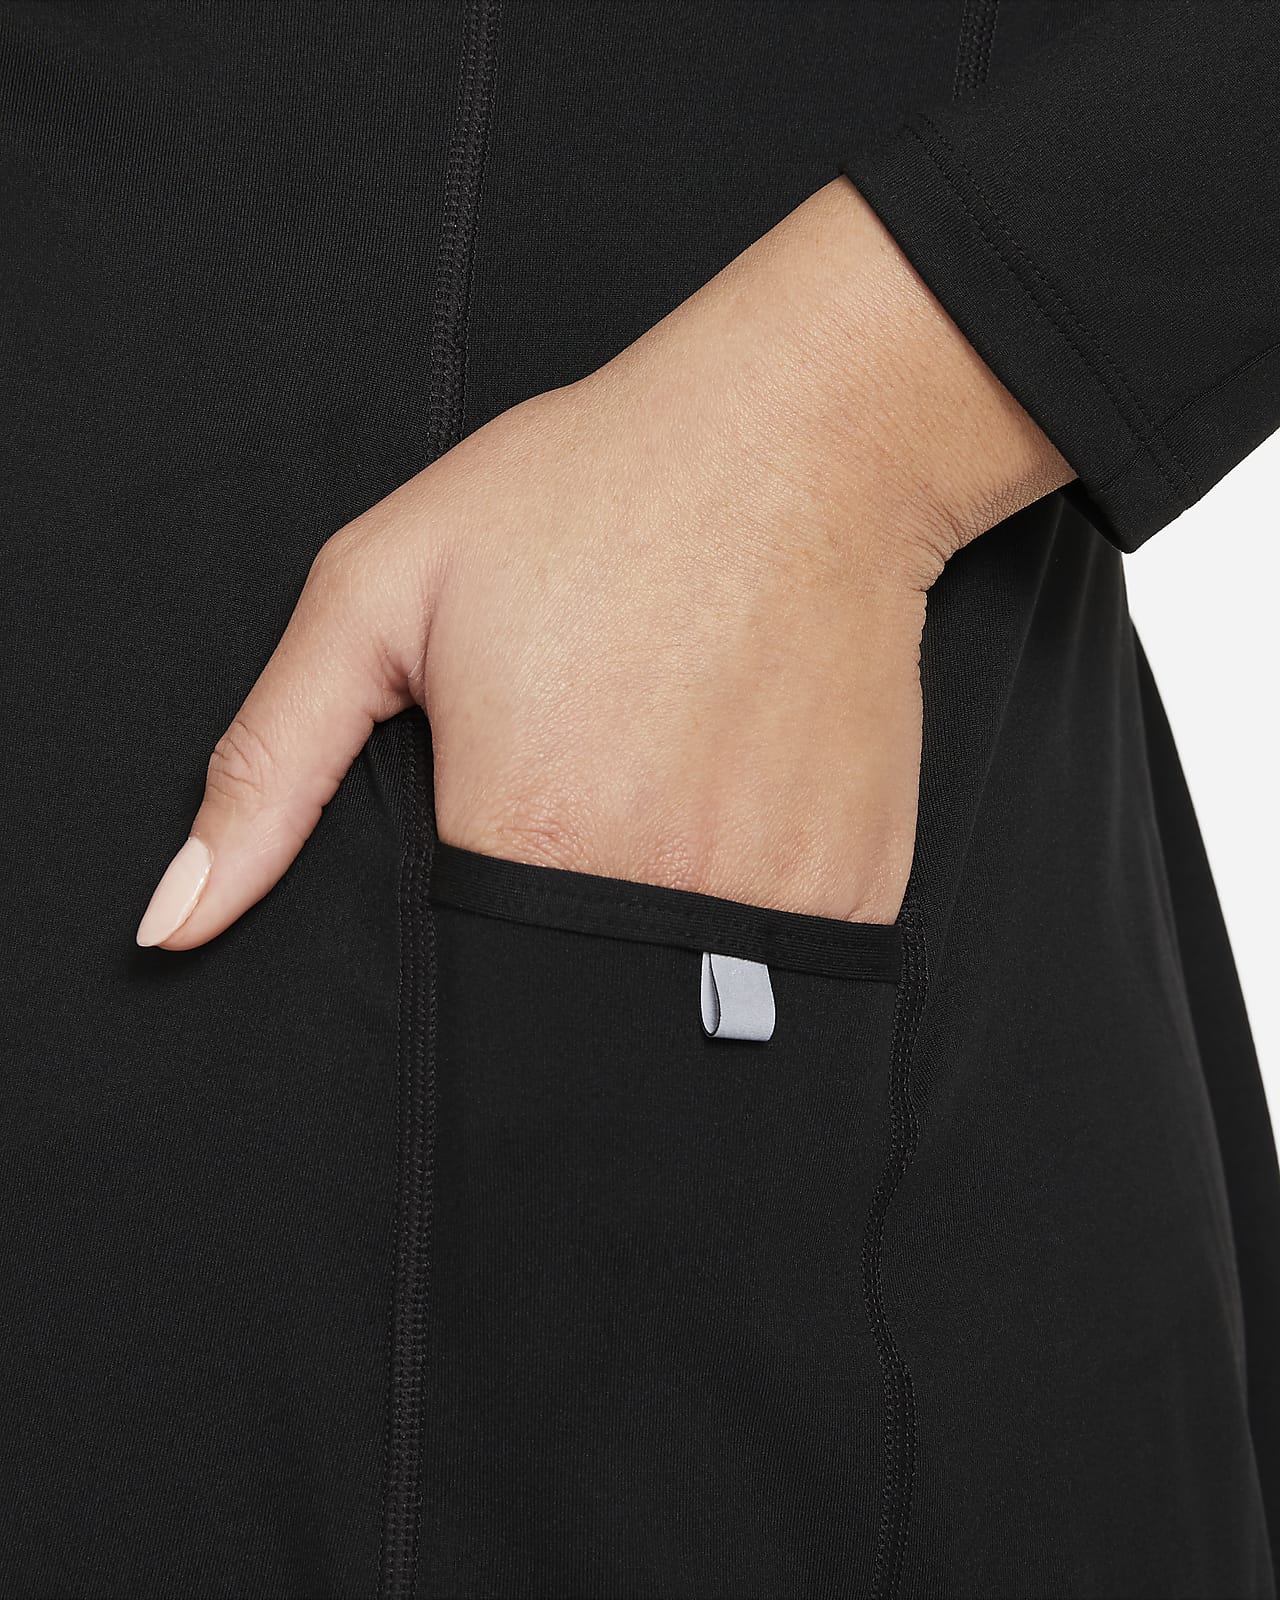 nike running top with pocket